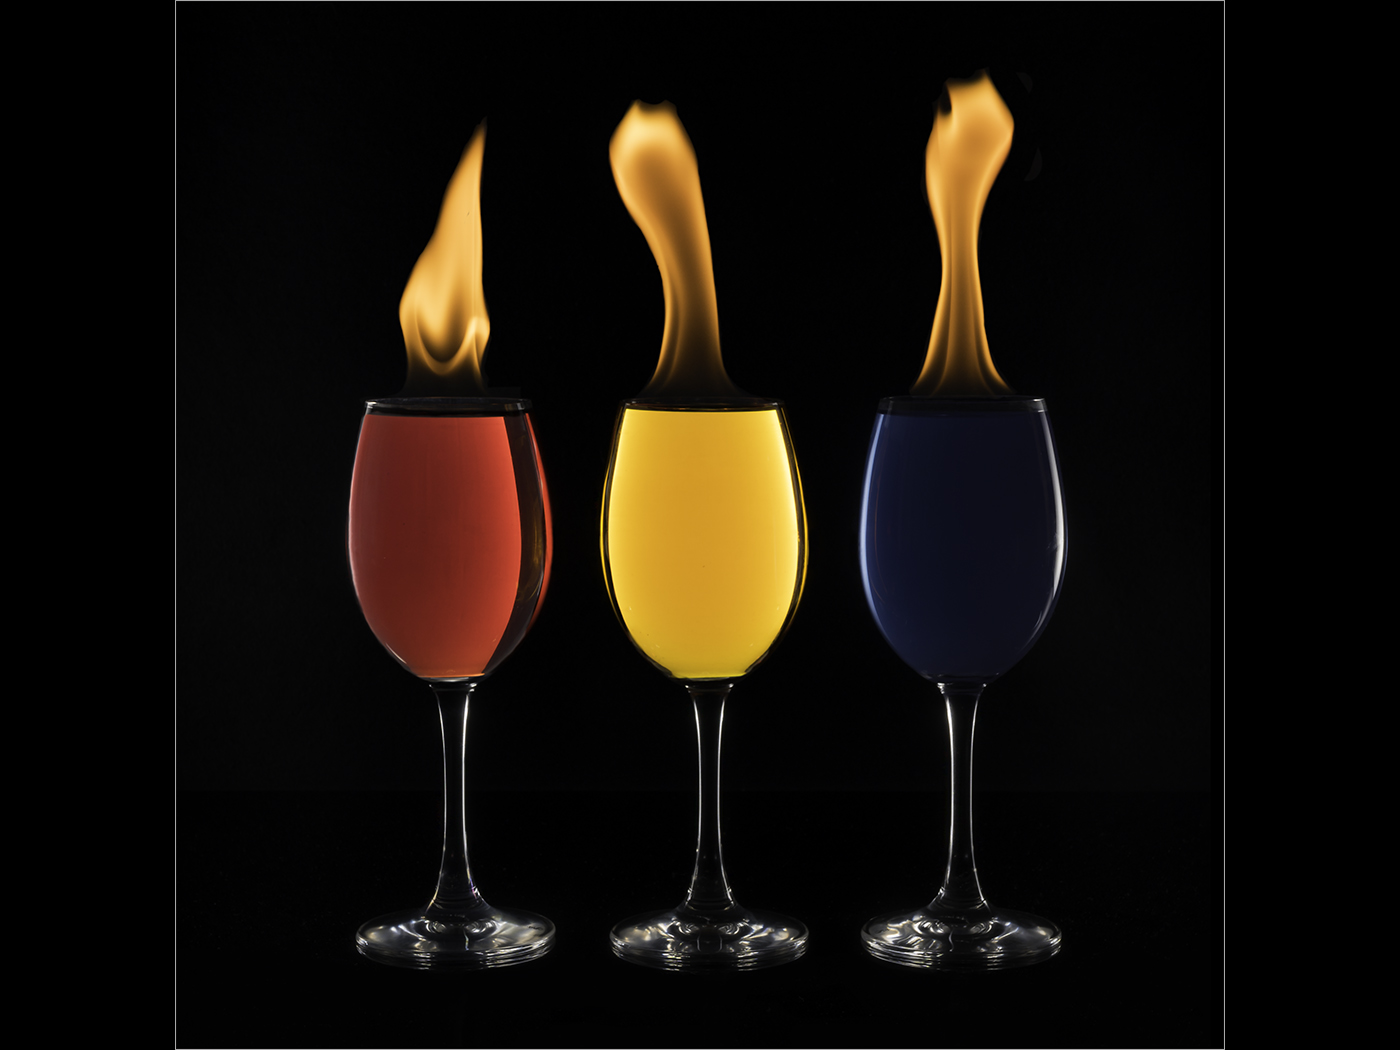 FLAMING GLASS by Lester Woodward